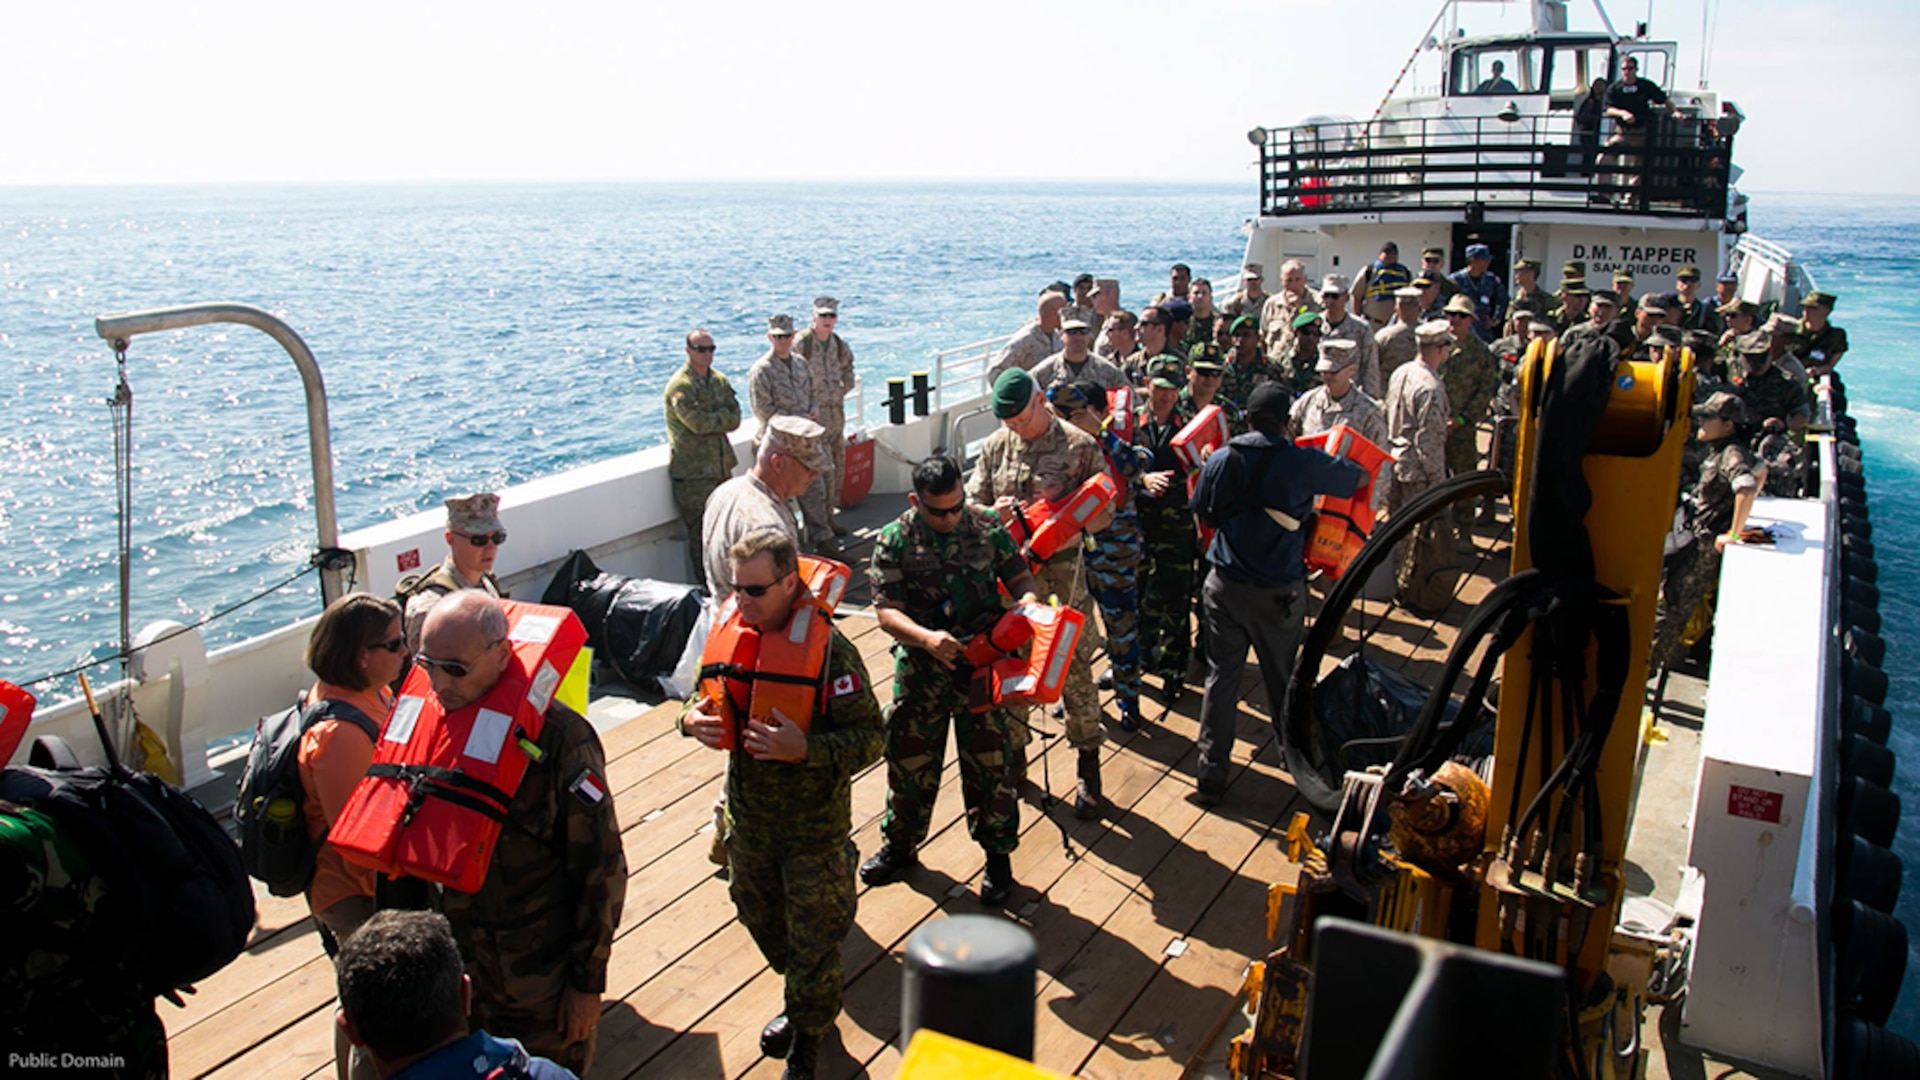 Senior U.S. and foreign military leaders prepare to embark the USNS John Glenn, not shown, during the USPACOM Amphibious Leaders Symposium (PALS) off the coast of U.S. Marine Corps Base Camp Pendleton, Calif., July 13, 2016. PALS brings together senior leaders of allied and partner nations from the Indo-Asia Pacific region to discuss key aspects of maritime/amphibious operations, capability development, crisis response, and interoperability. Twenty-two allied and partnered nations, including the U.S. are participating.